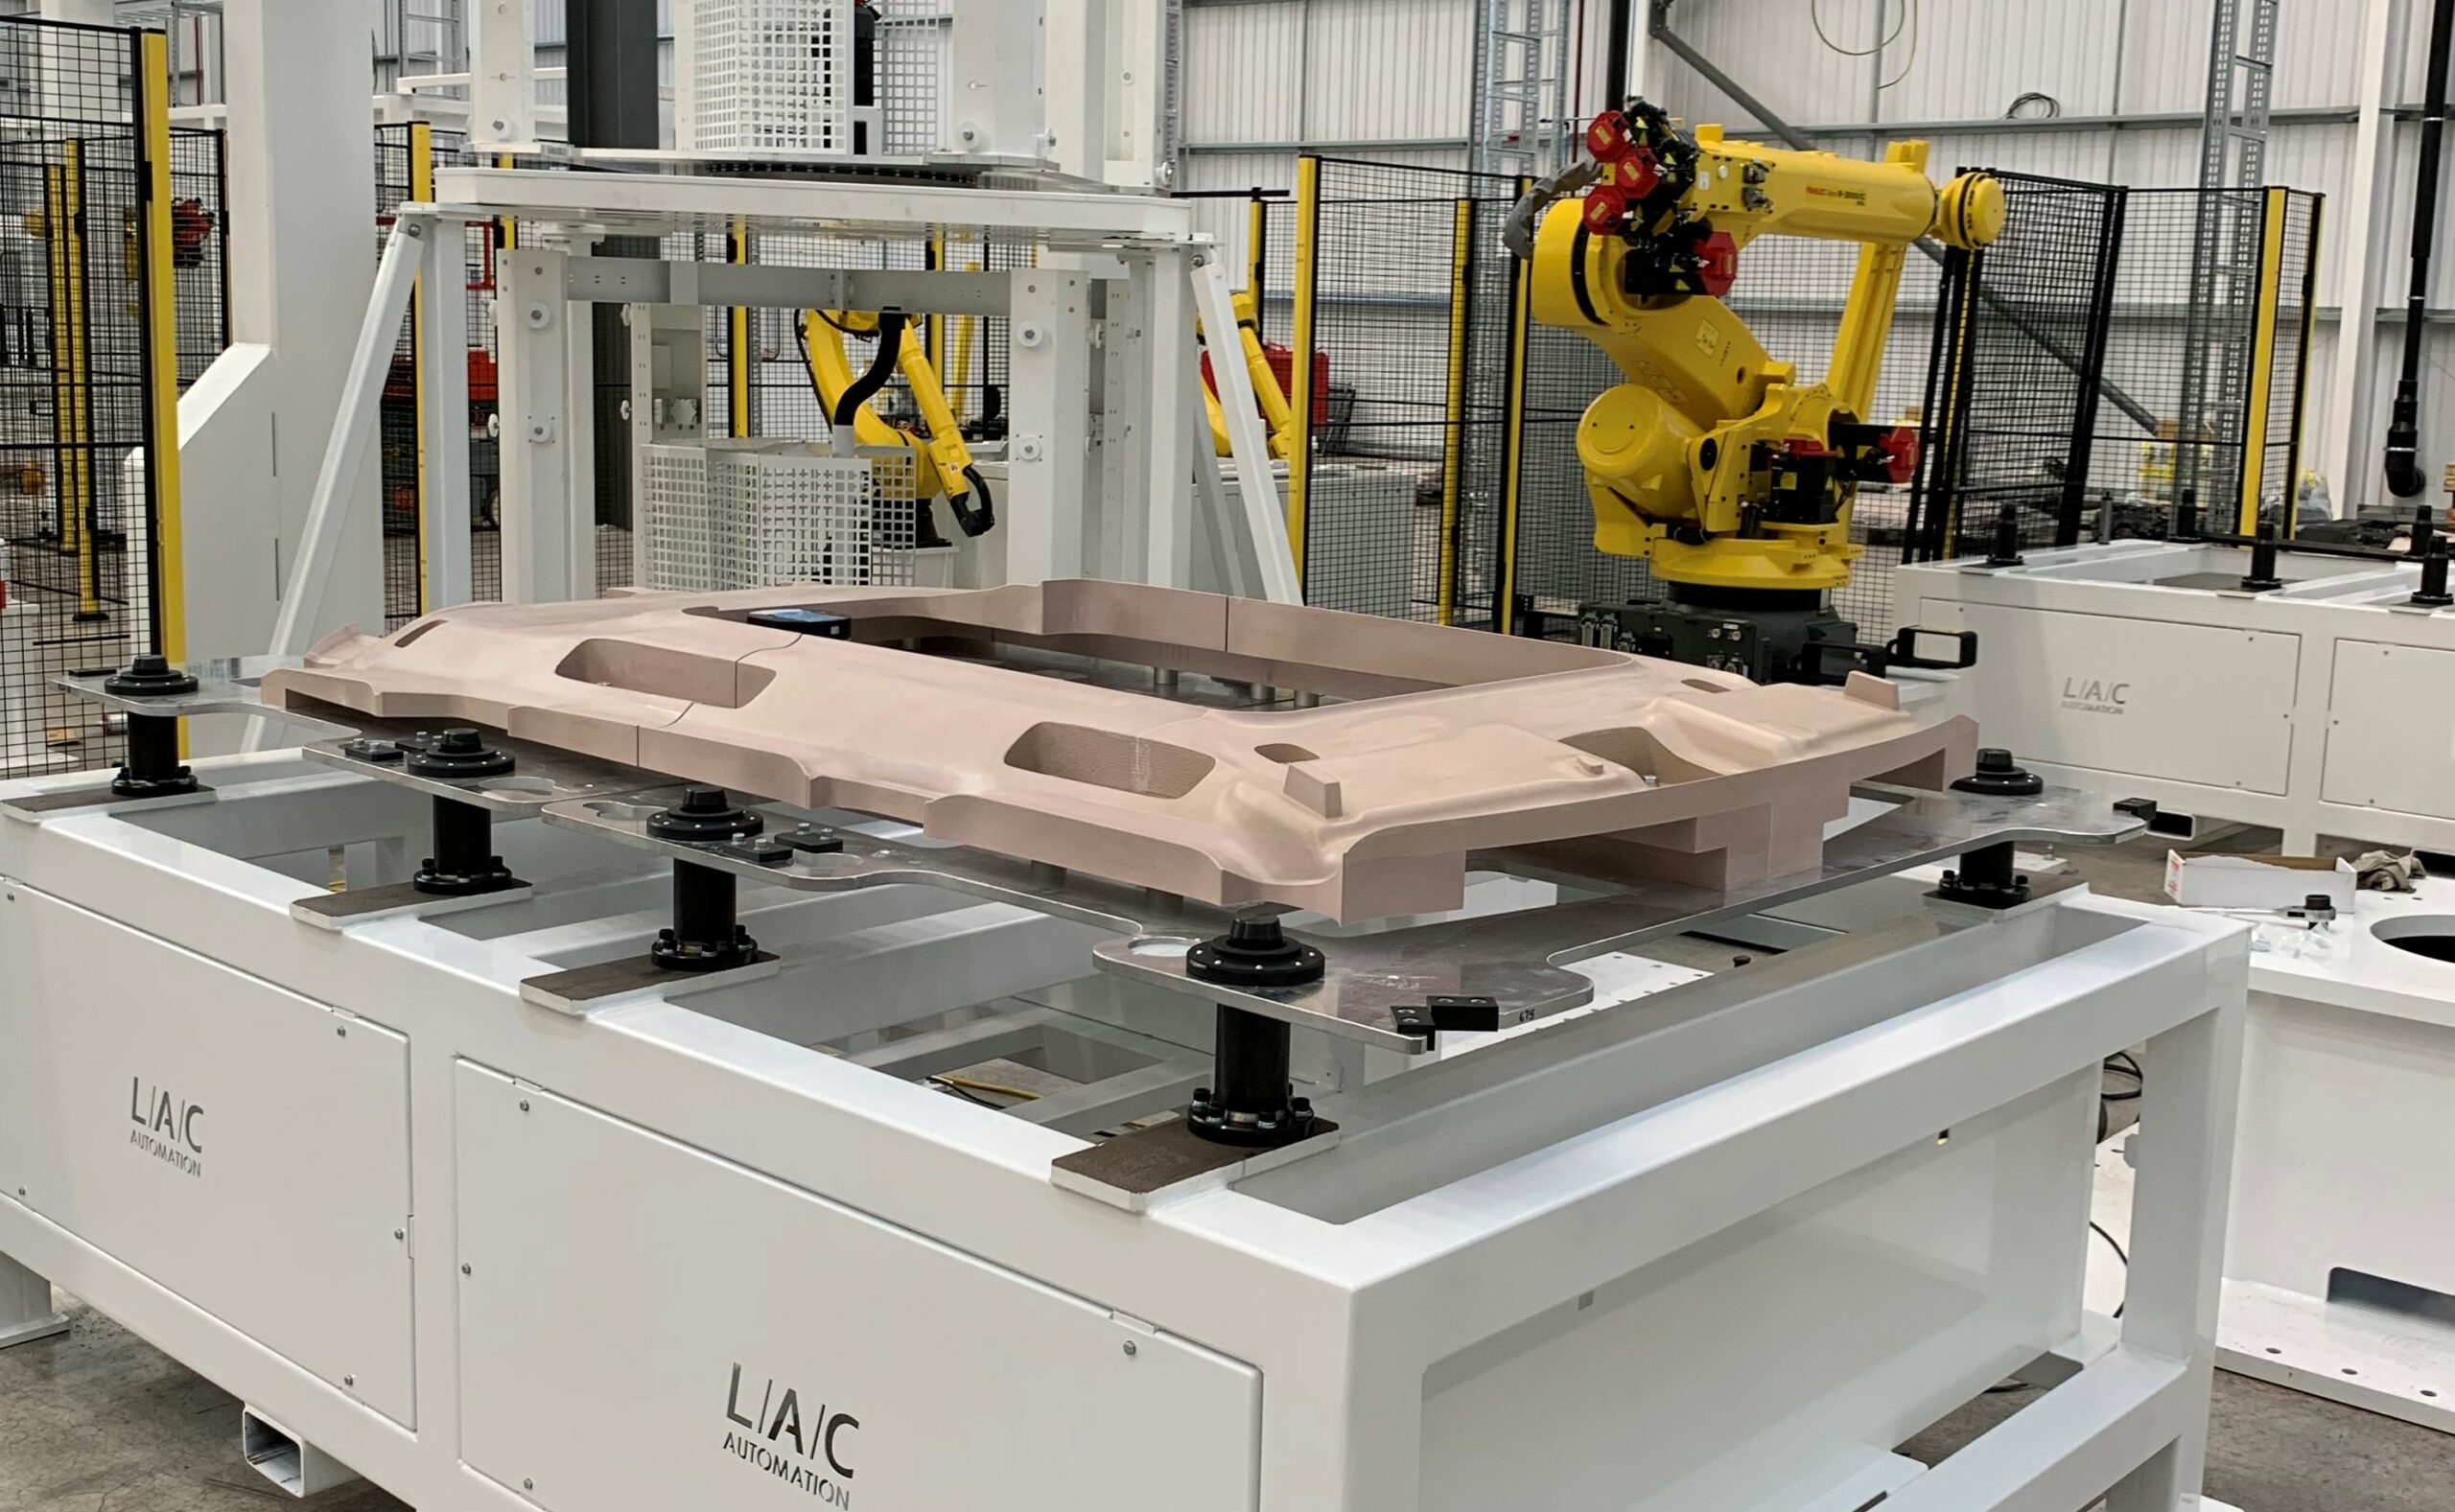 Bespoke automation equipment designed and manufactured by LAC Logistics Automation